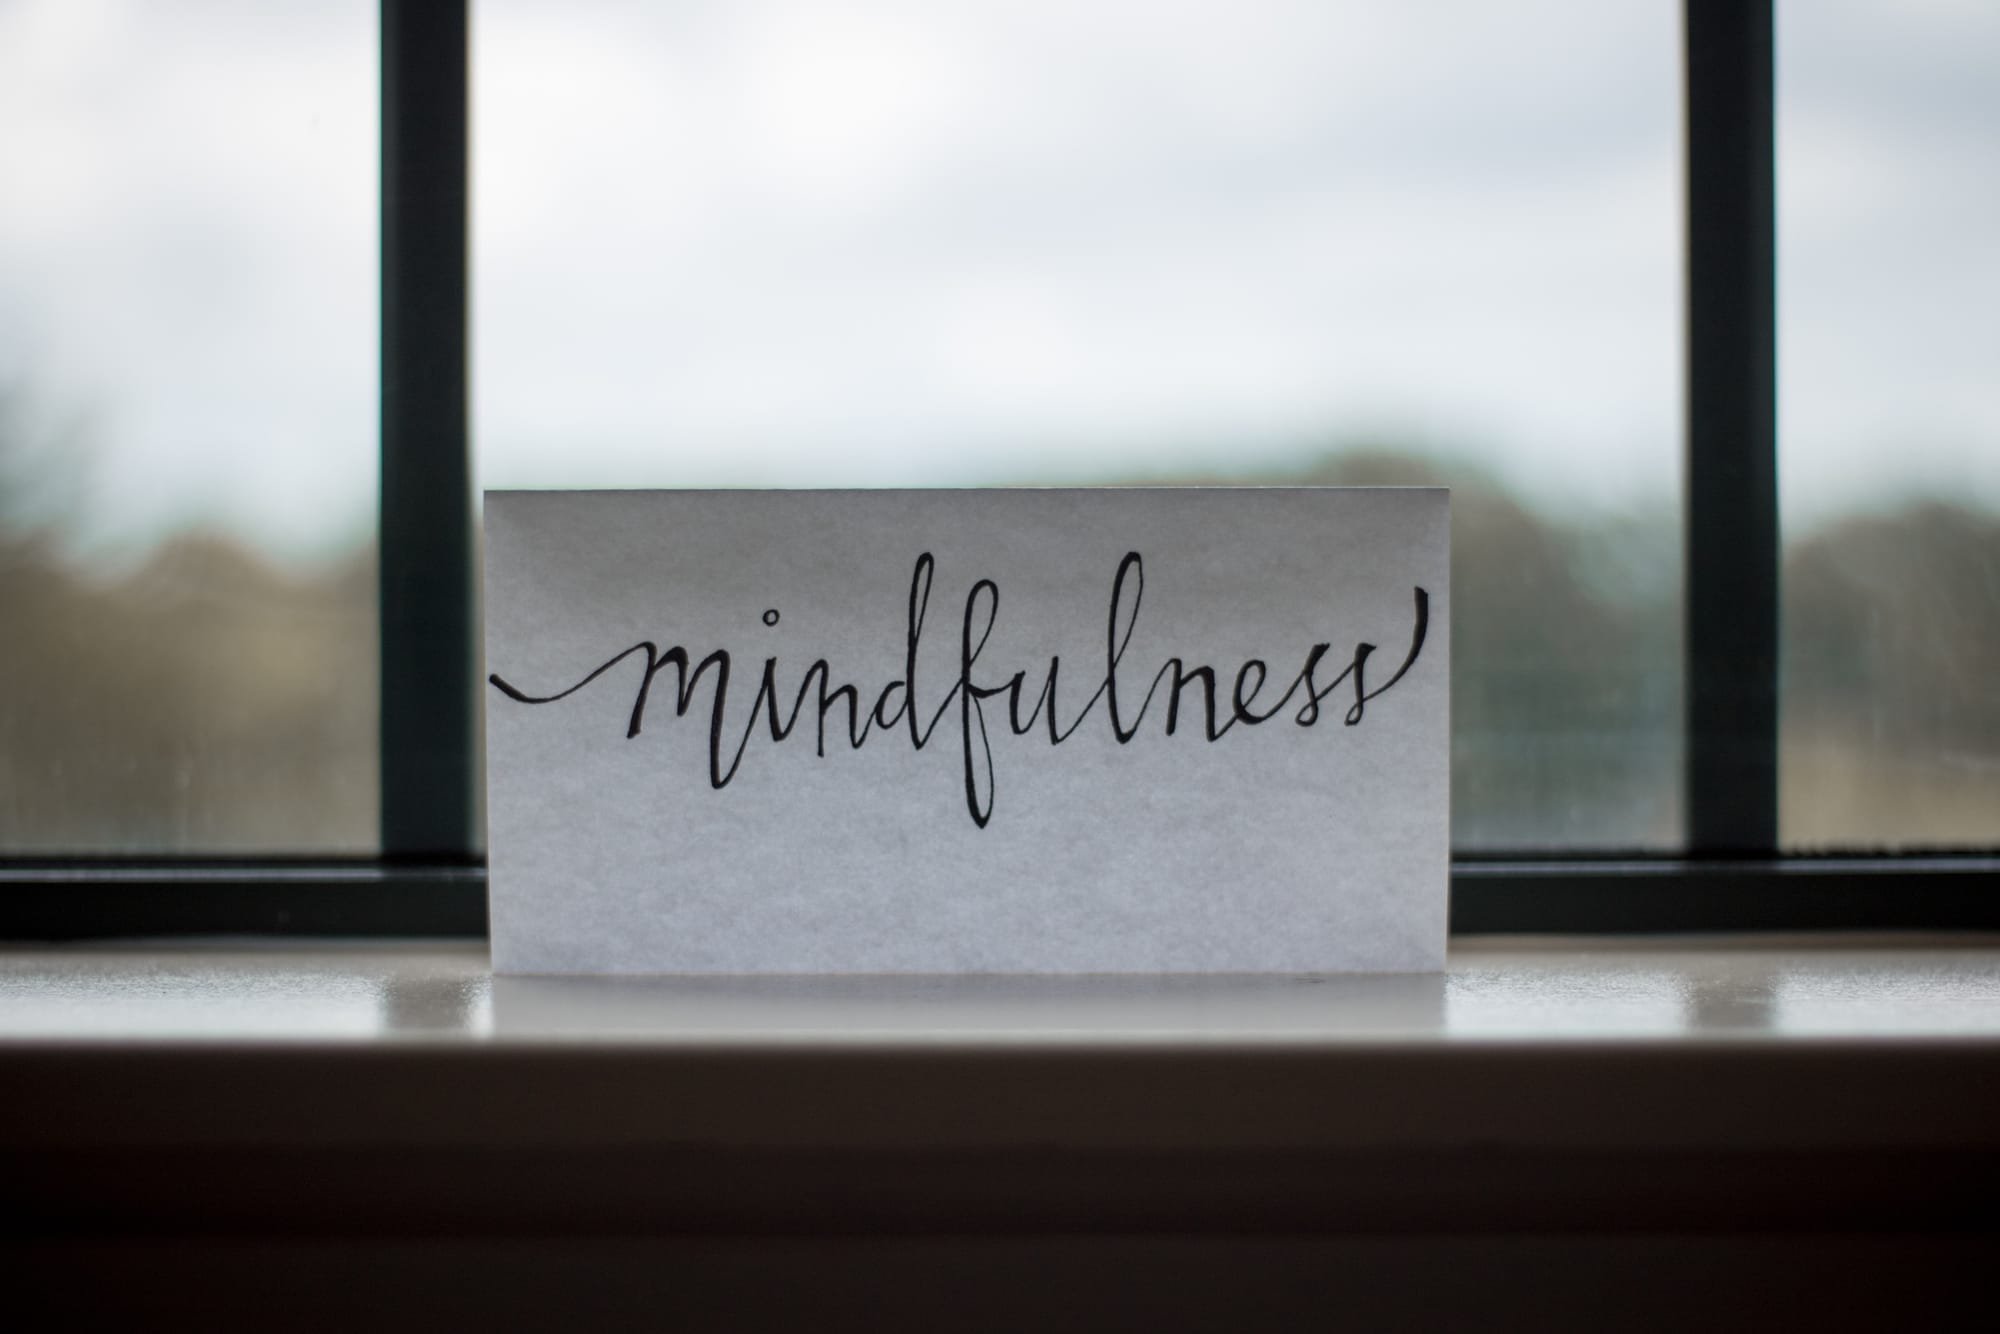 Some things you probably didn't know about mindfulness